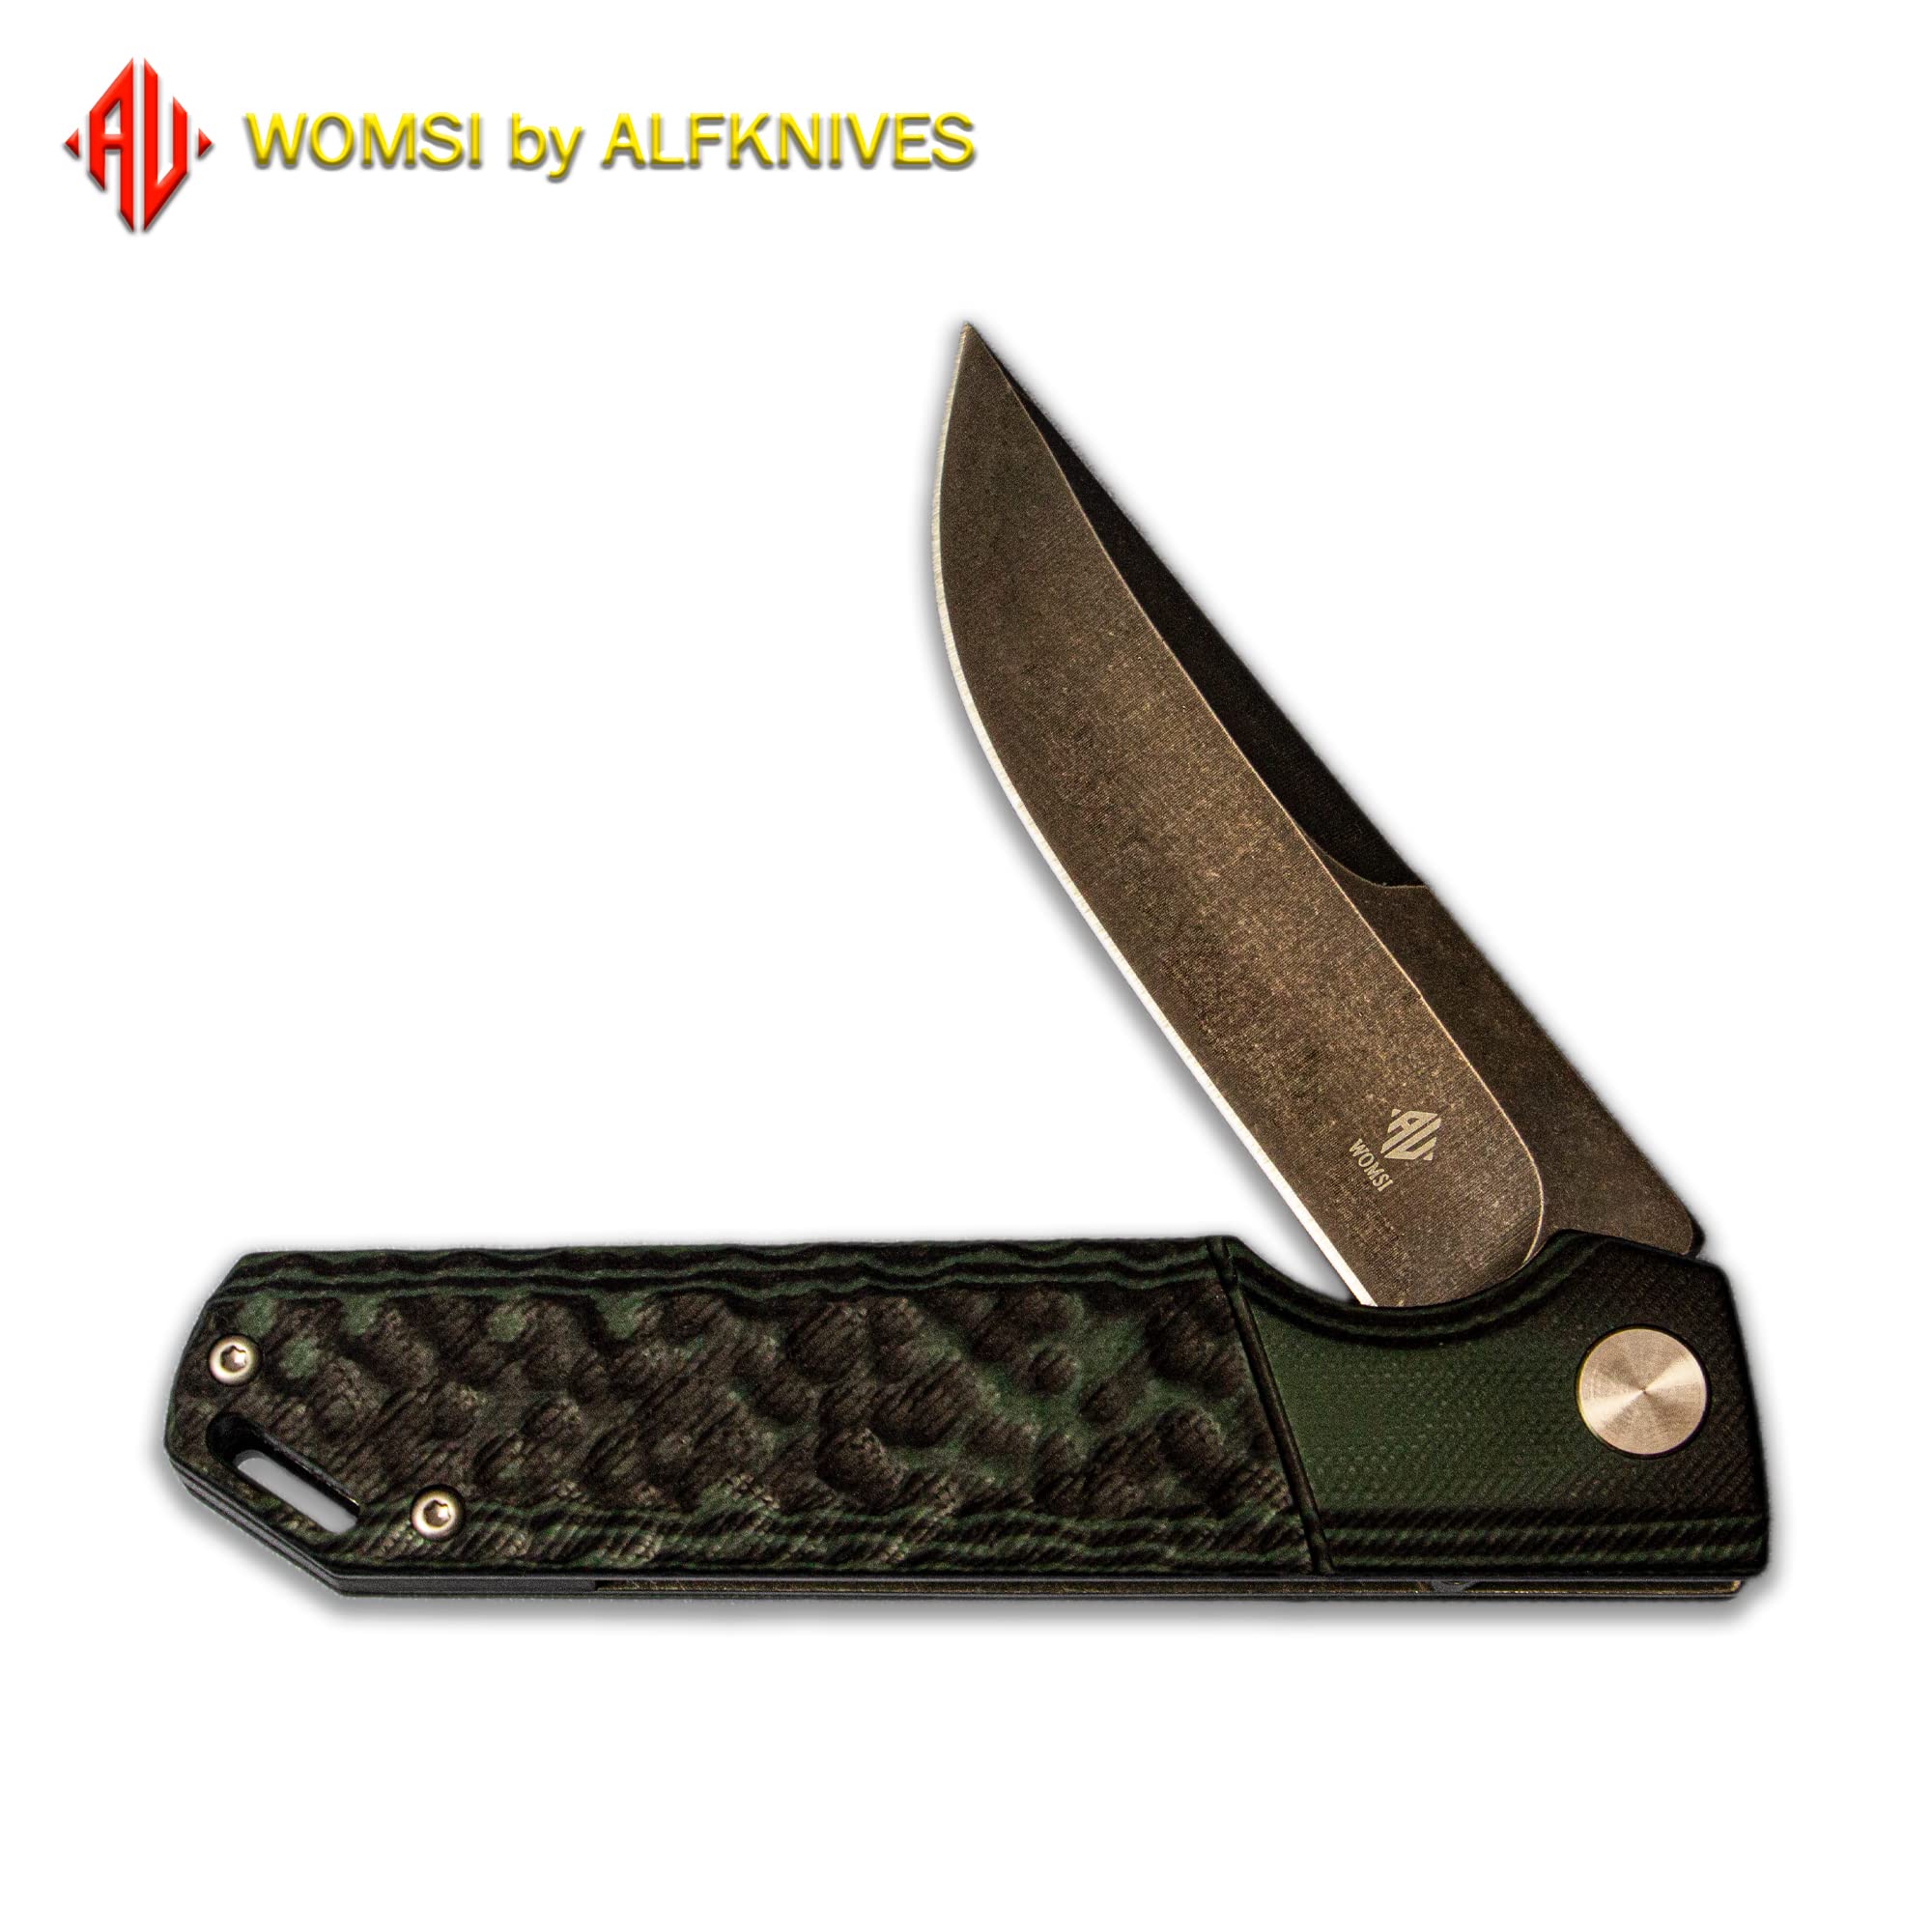 WOMSI Folding Knife,420 Stainless Steel/60HRC Blade,Sonorous&durable G10 Handle,Ceramic Bearing Inside,for Hunter Outdoor Bushcraft Fishing Hiking,with Gift Box